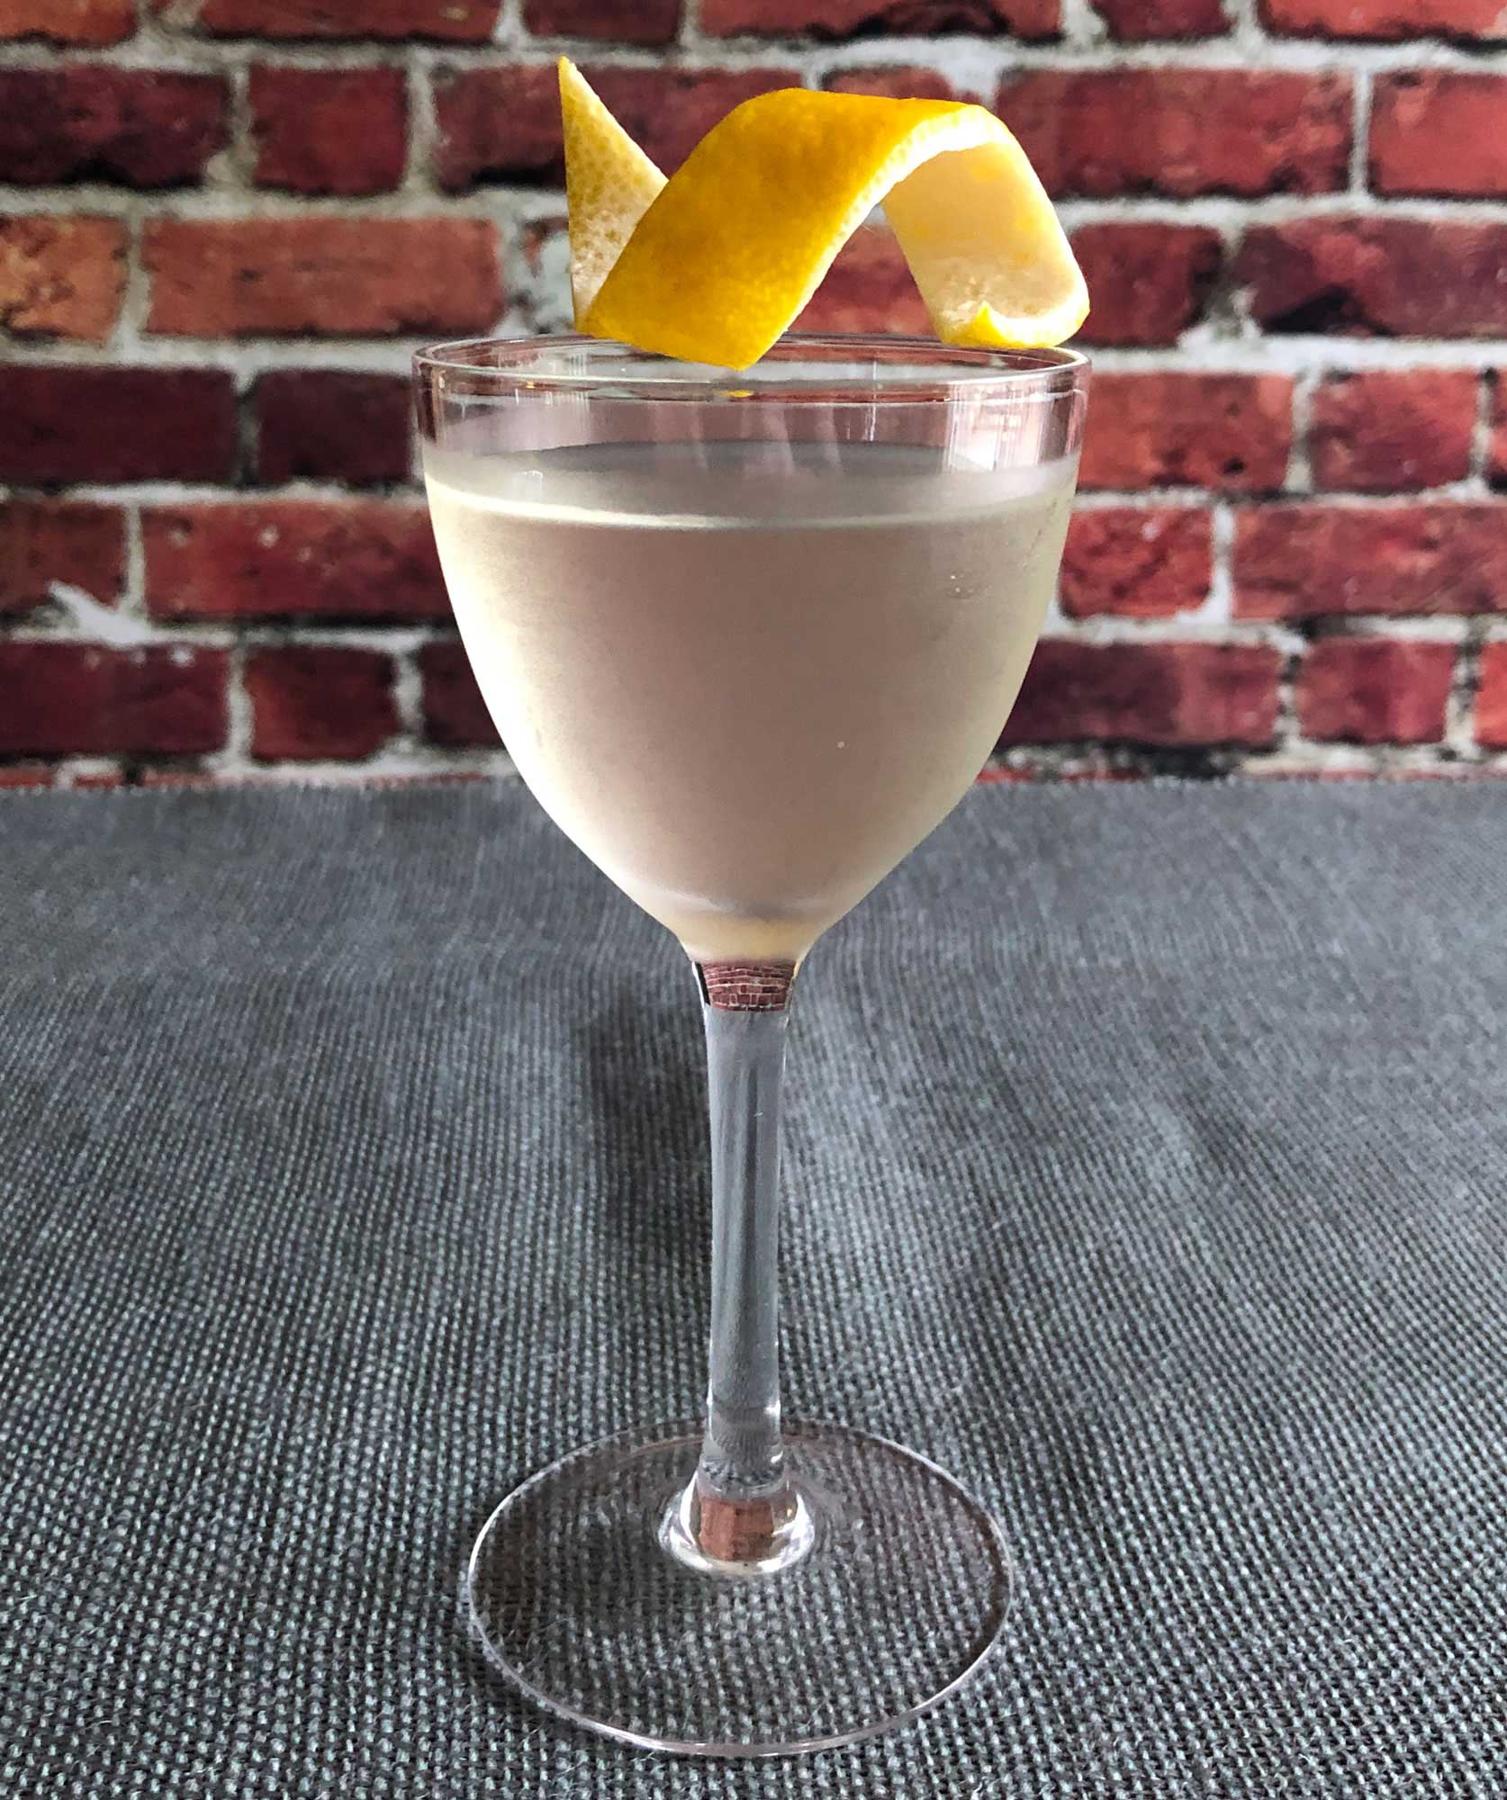 An example of the 600,000 Pesos, the mixed drink (drink) featuring mezcal, Dolin Blanc Vermouth de Chambéry, Dolin Génépy le Chamois Liqueur, and lemon twist; photo by Lee Edwards